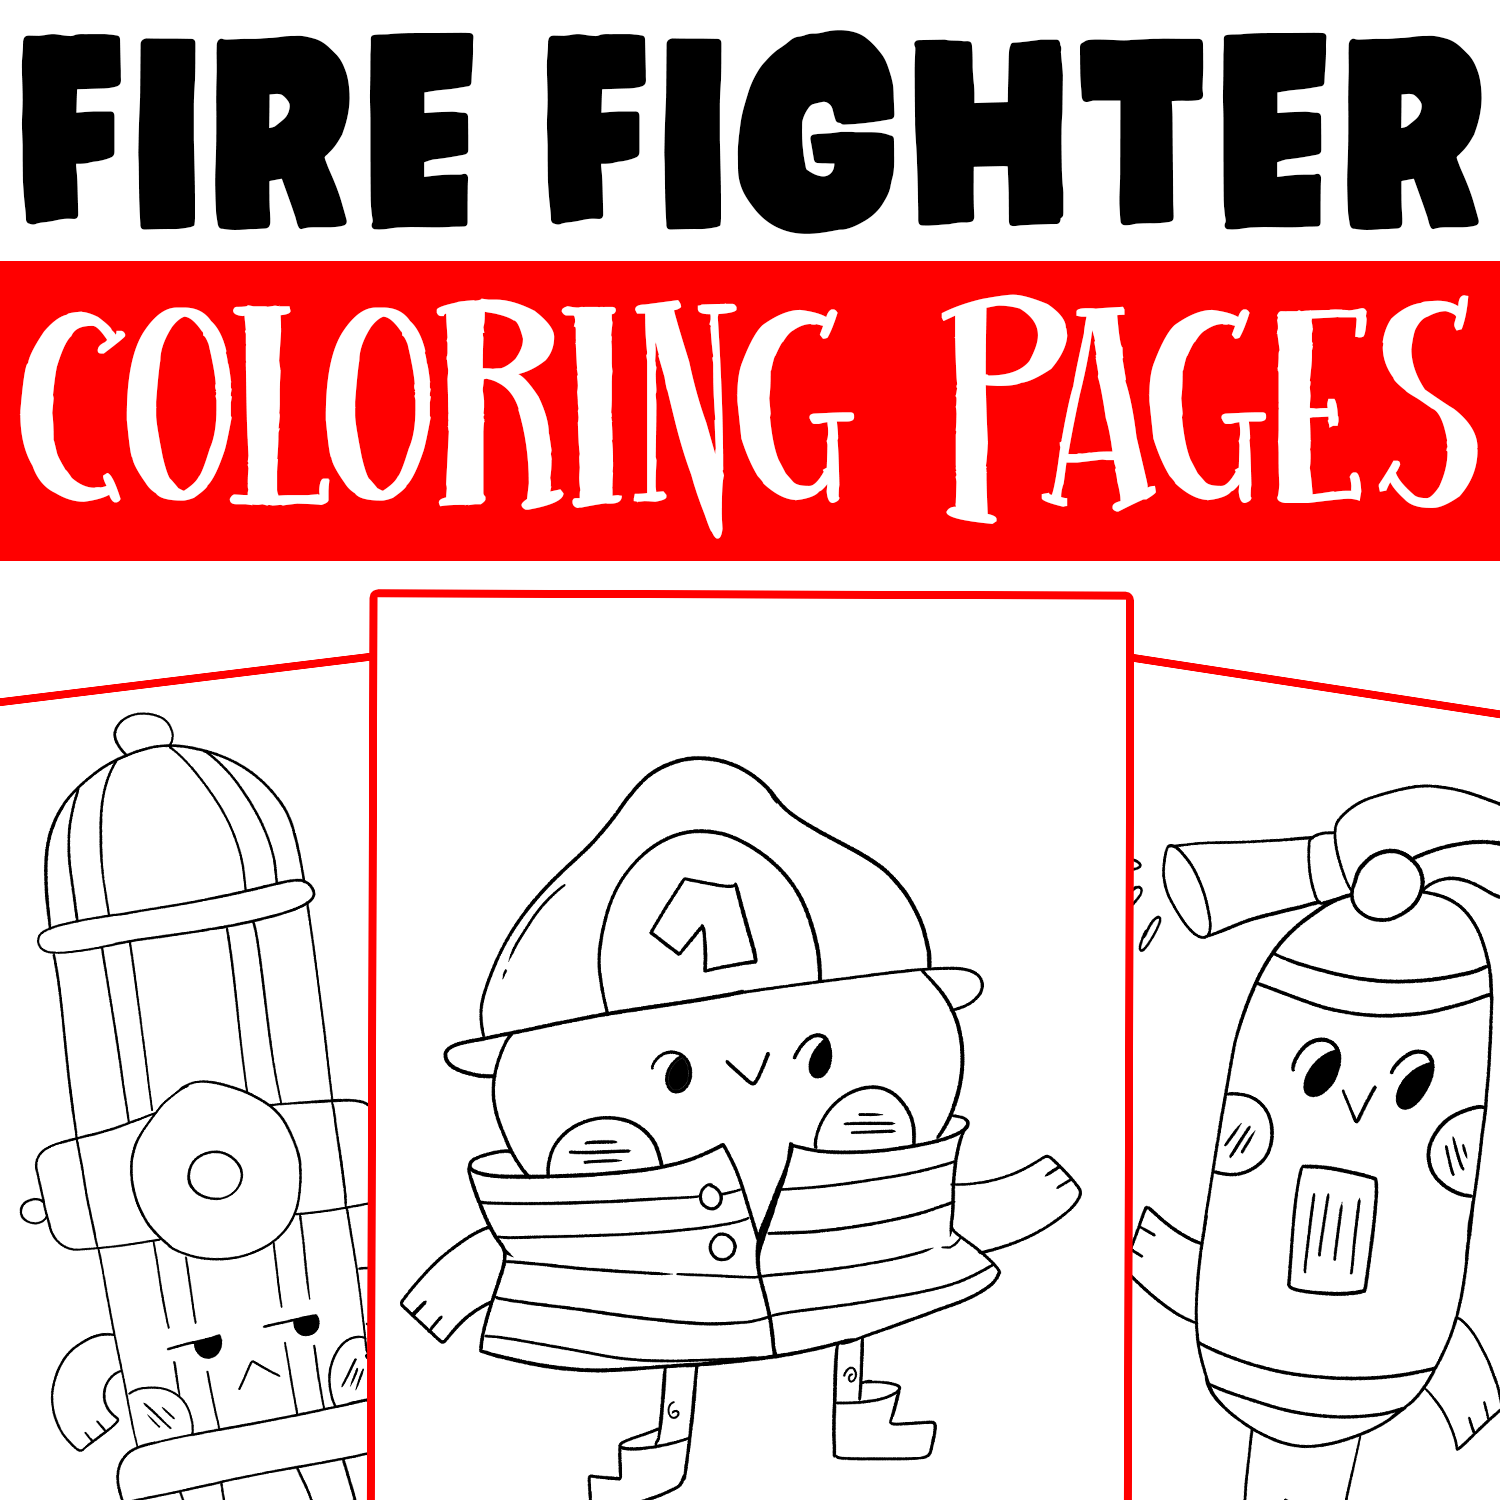 Firefighter coloring pages fire safety week coloring pages coloring sheets made by teachers